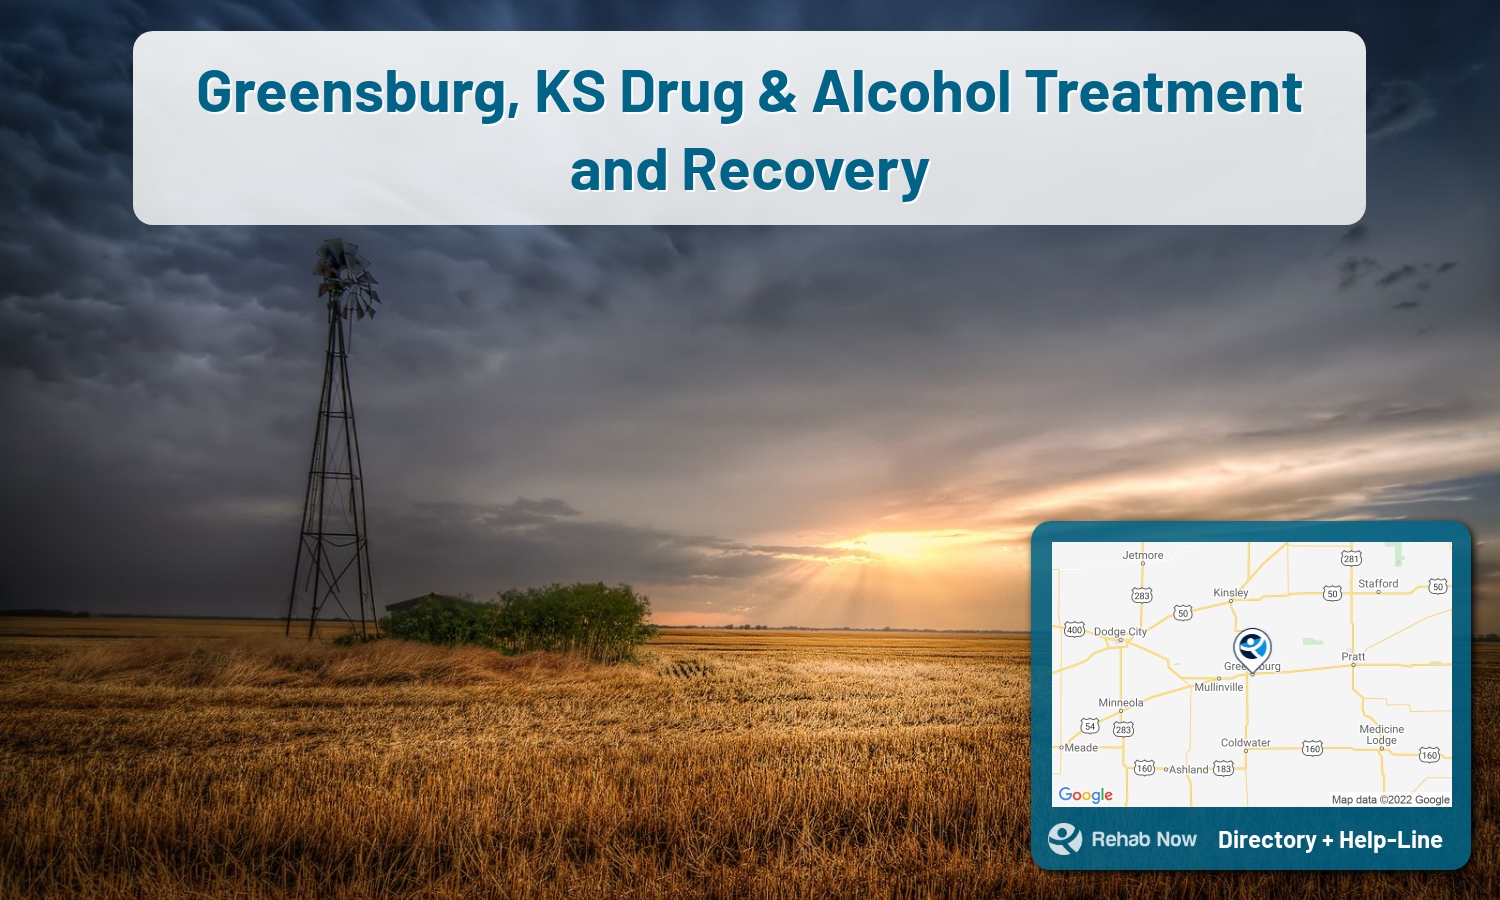 List of alcohol and drug treatment centers near you in Greensburg, Kansas. Research certifications, programs, methods, pricing, and more.